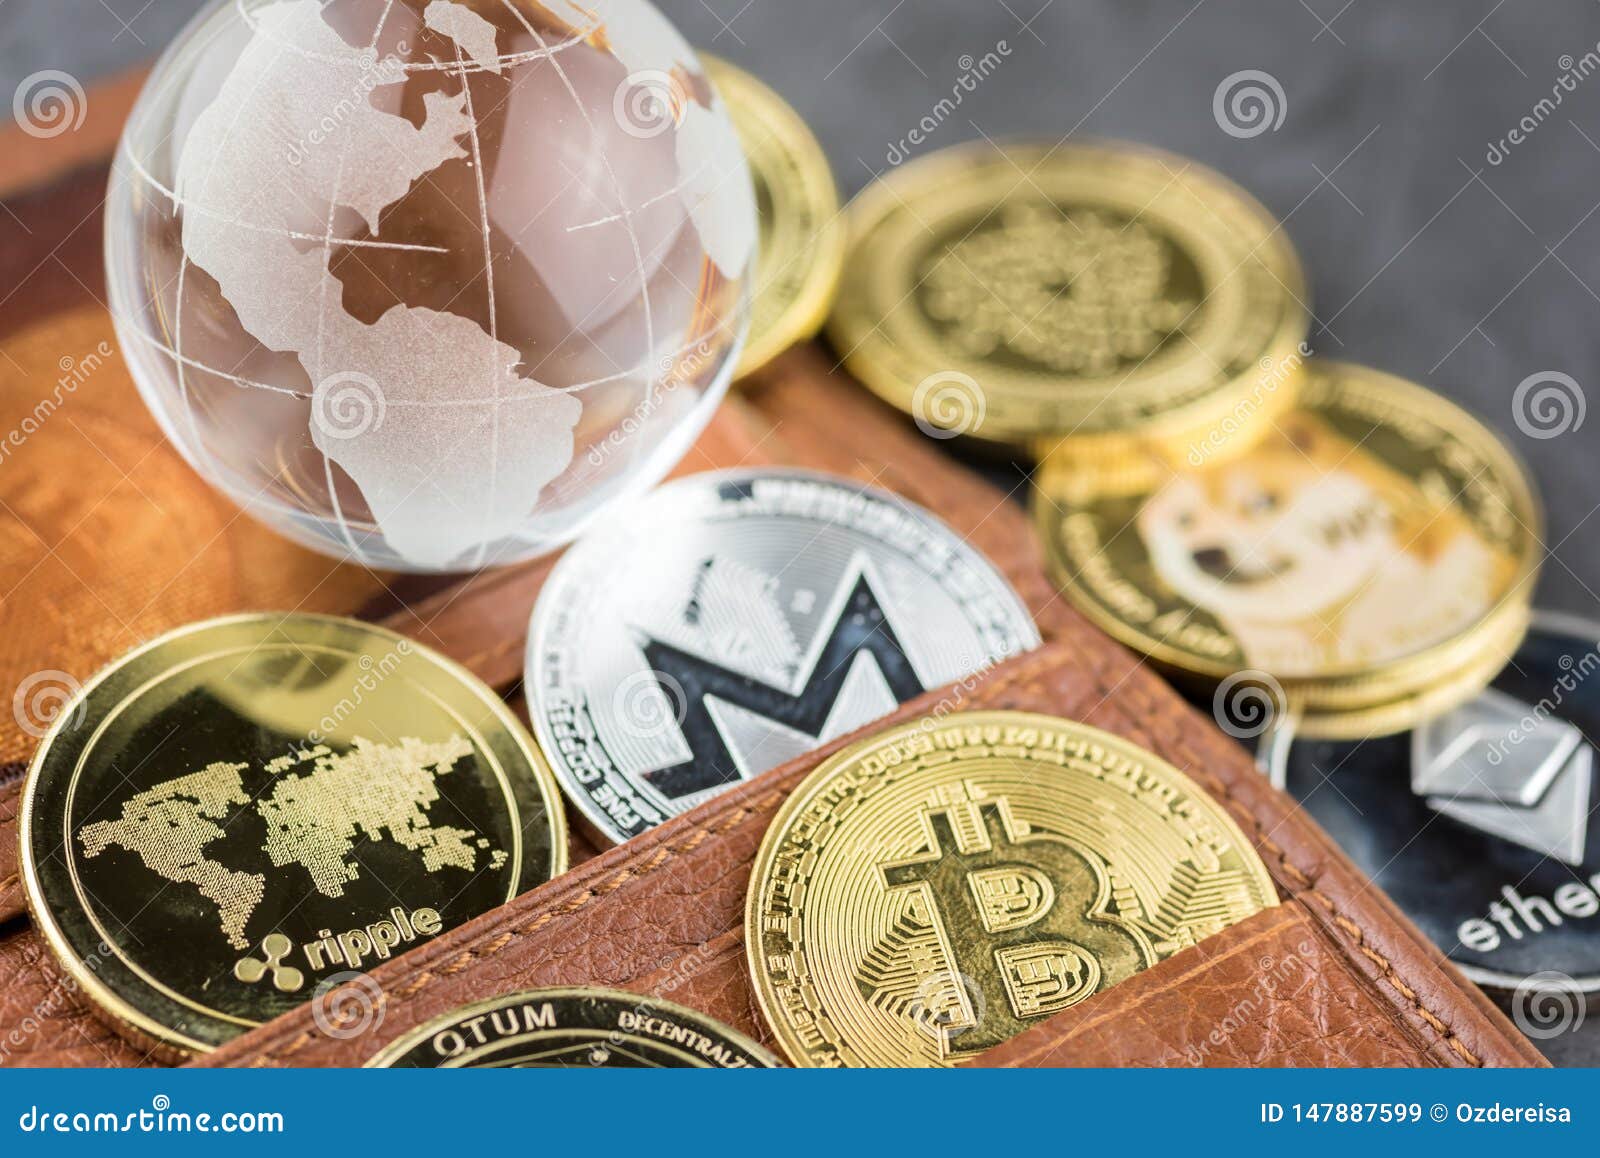 View Of Virtual Cryptocurrency Concept Image Stock Image ...